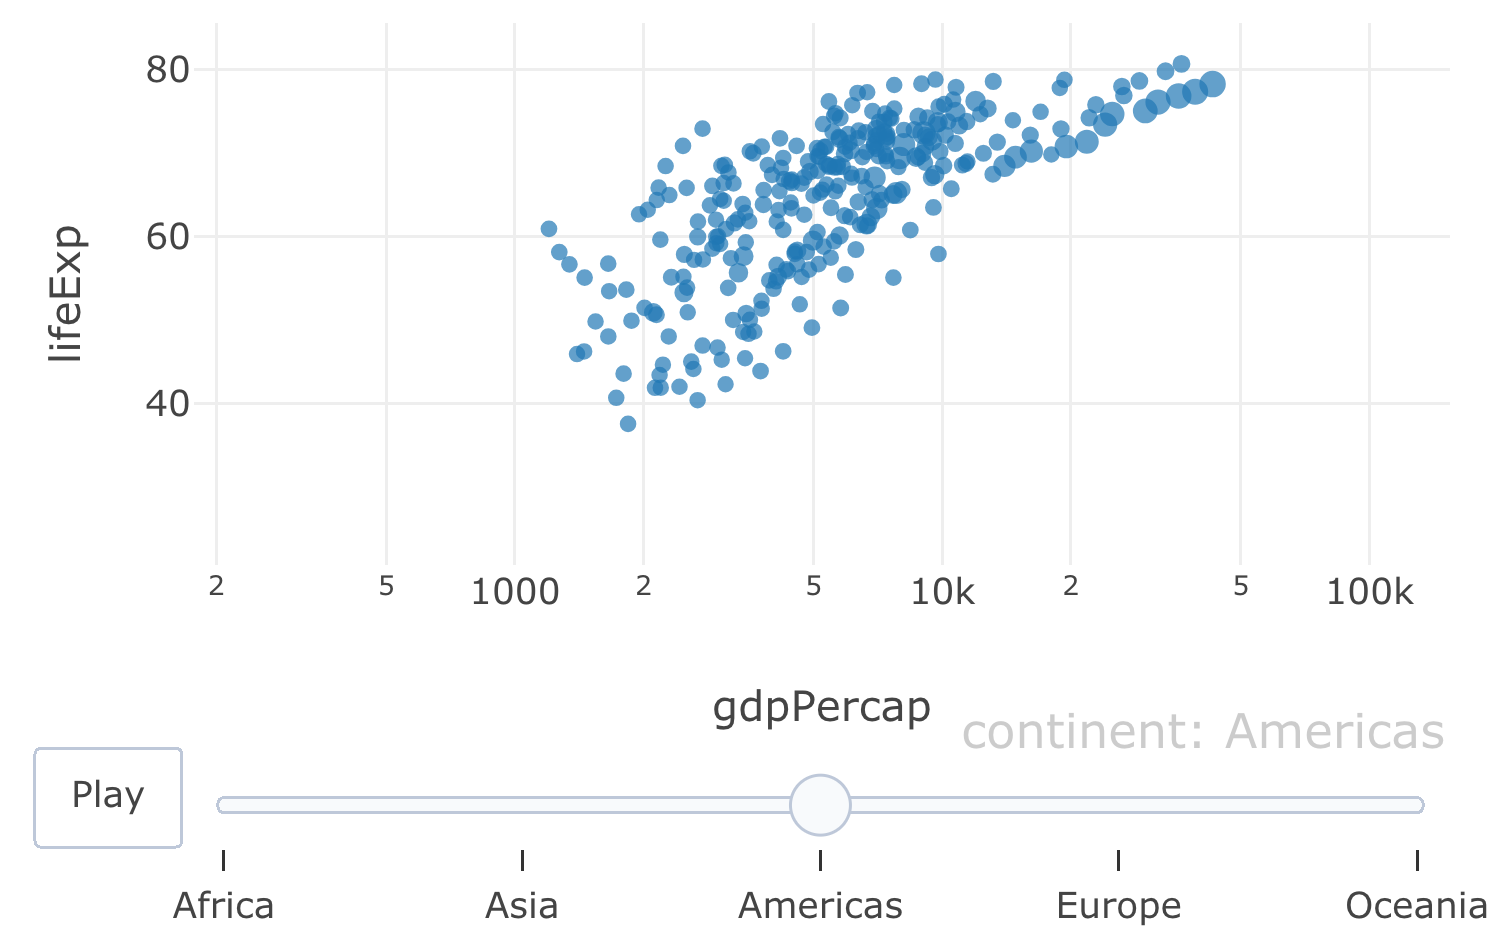 Animation of GDP per capita versus life expectancy by continent. The ordering of the continents goes from lowest average (across countries) life expectancy to highest.